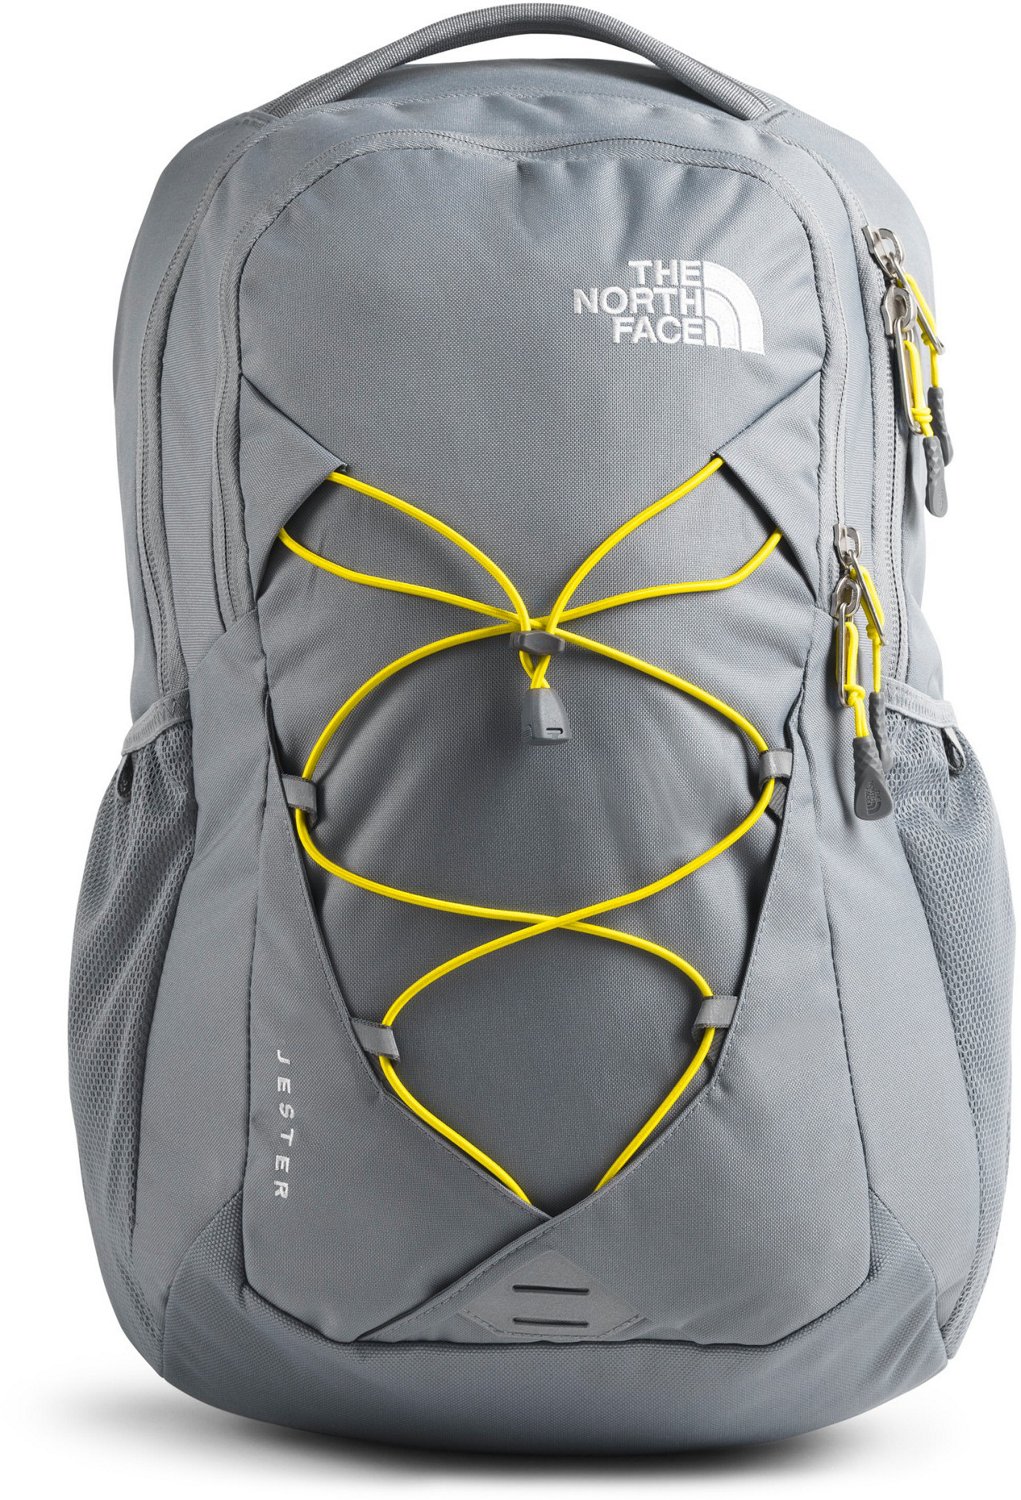 the north face backpack academy